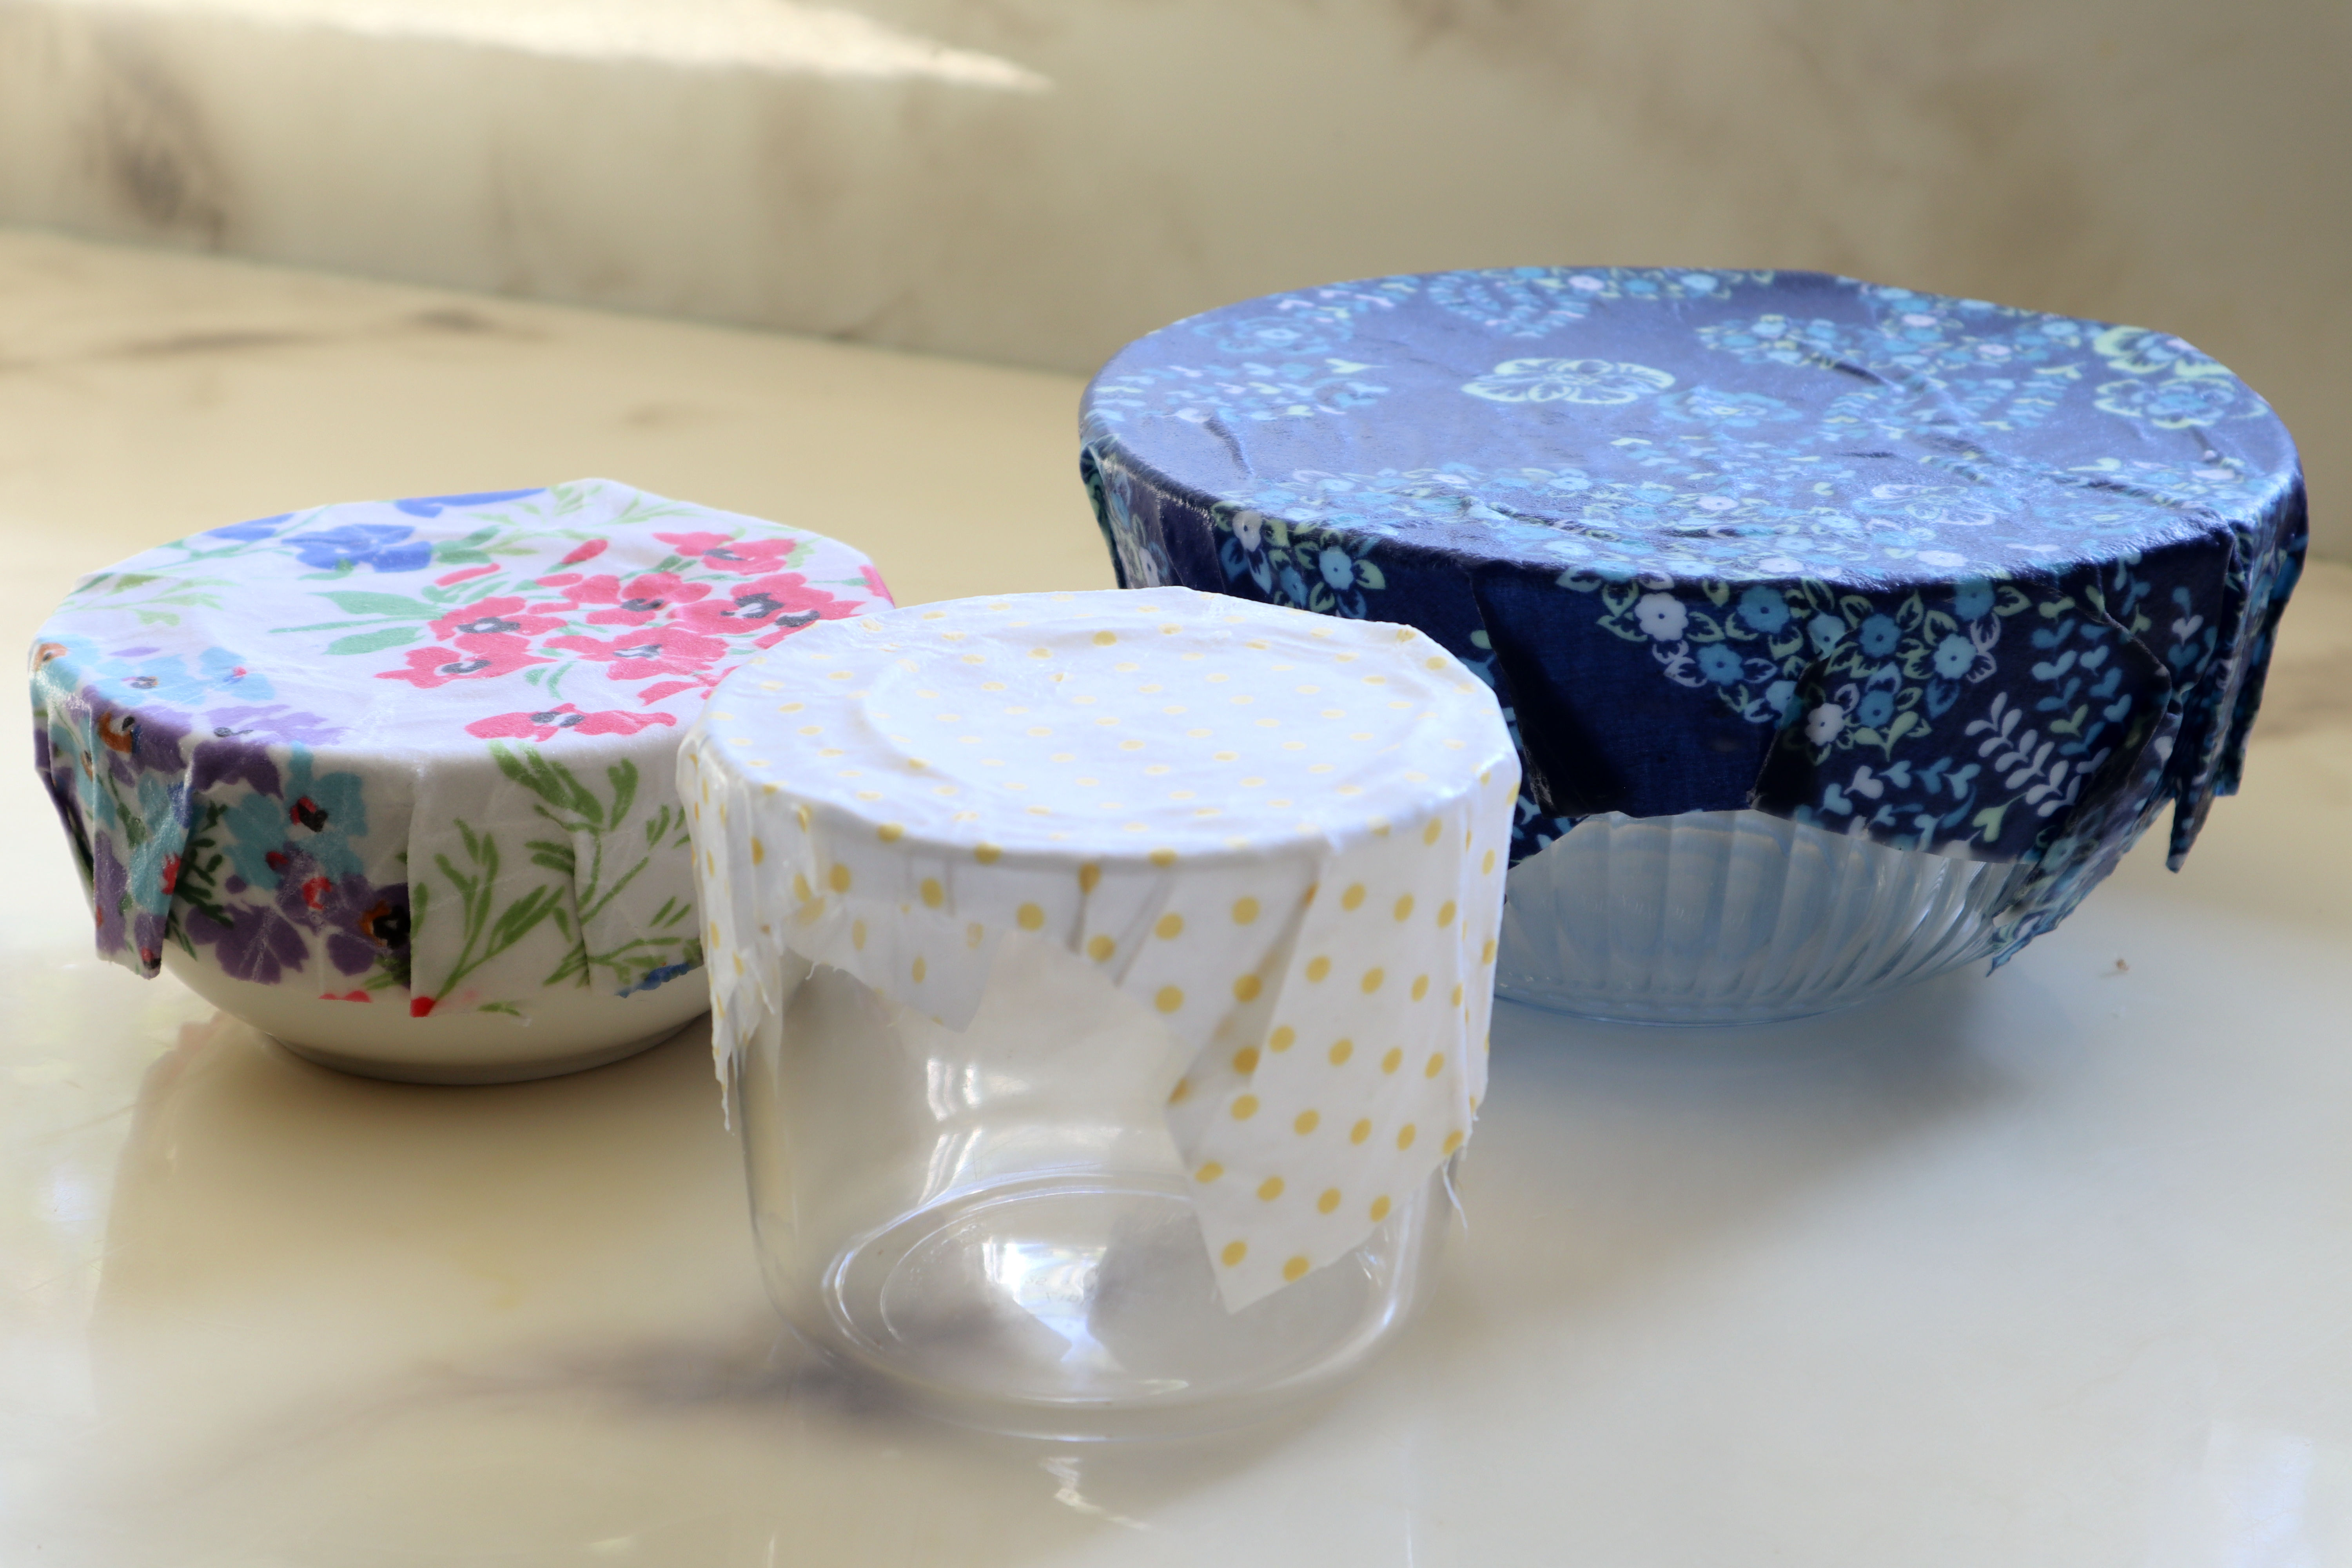 beeswax bowl covers and food wraps for a zero waste kitchen